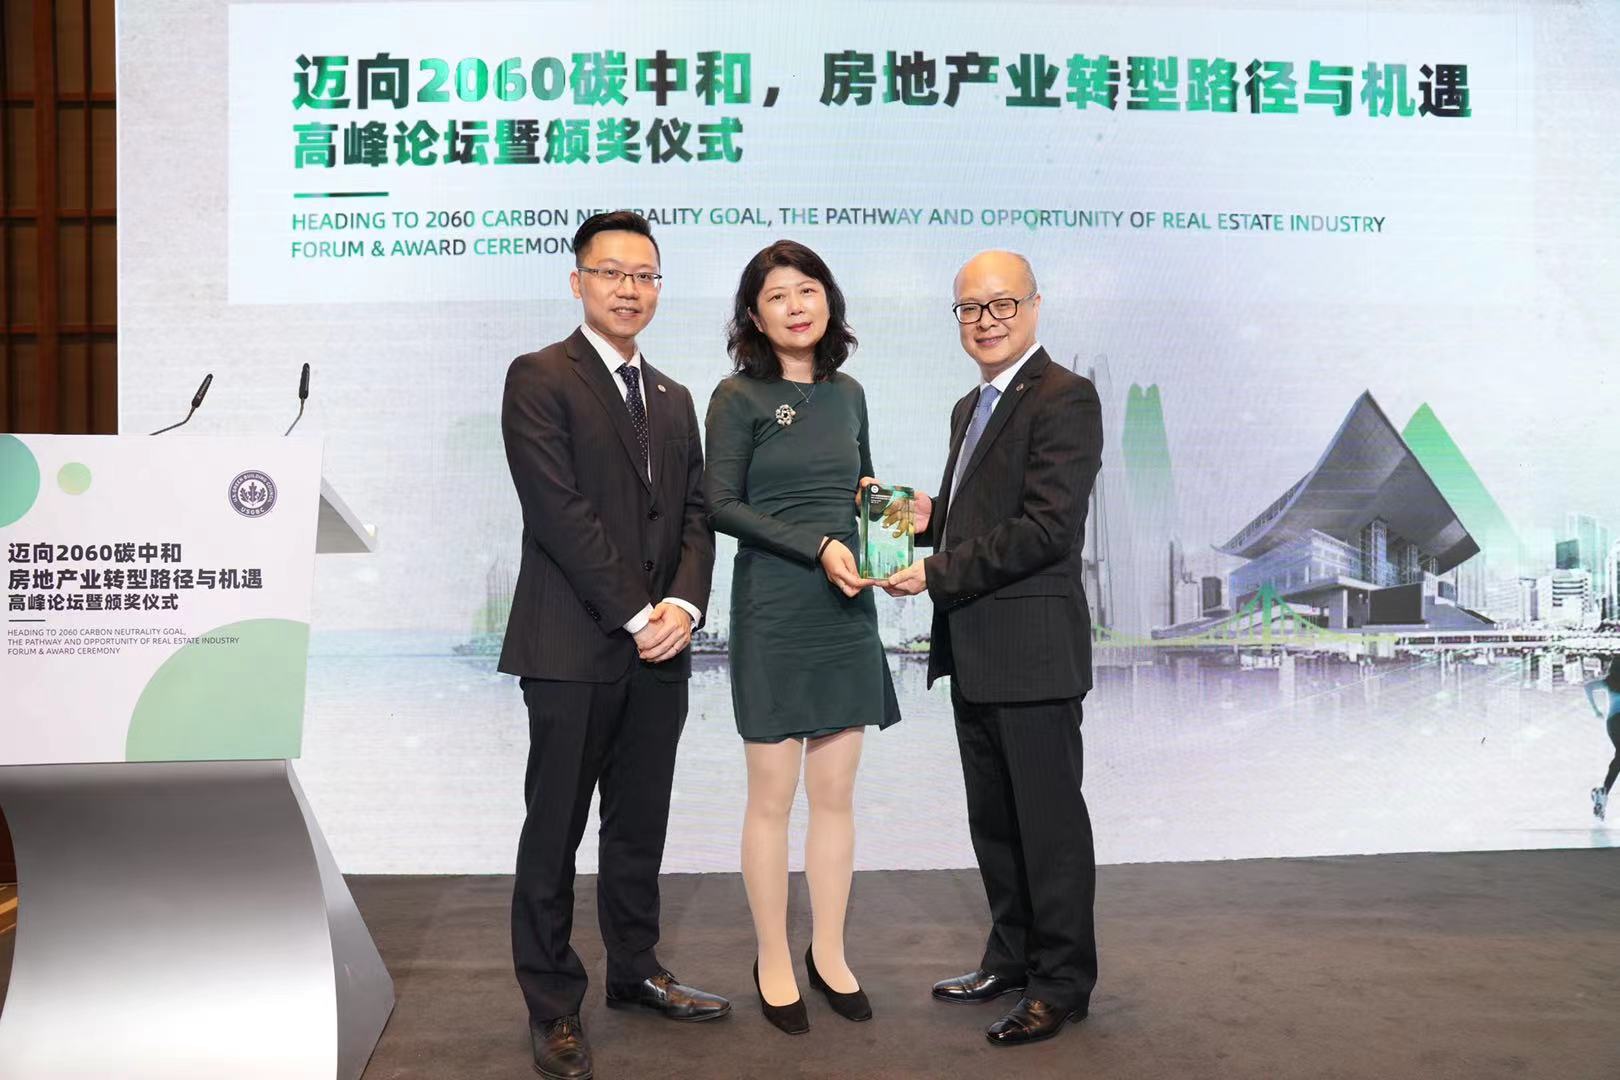 Dou Zhang stands in between two men on stage while accepting her award